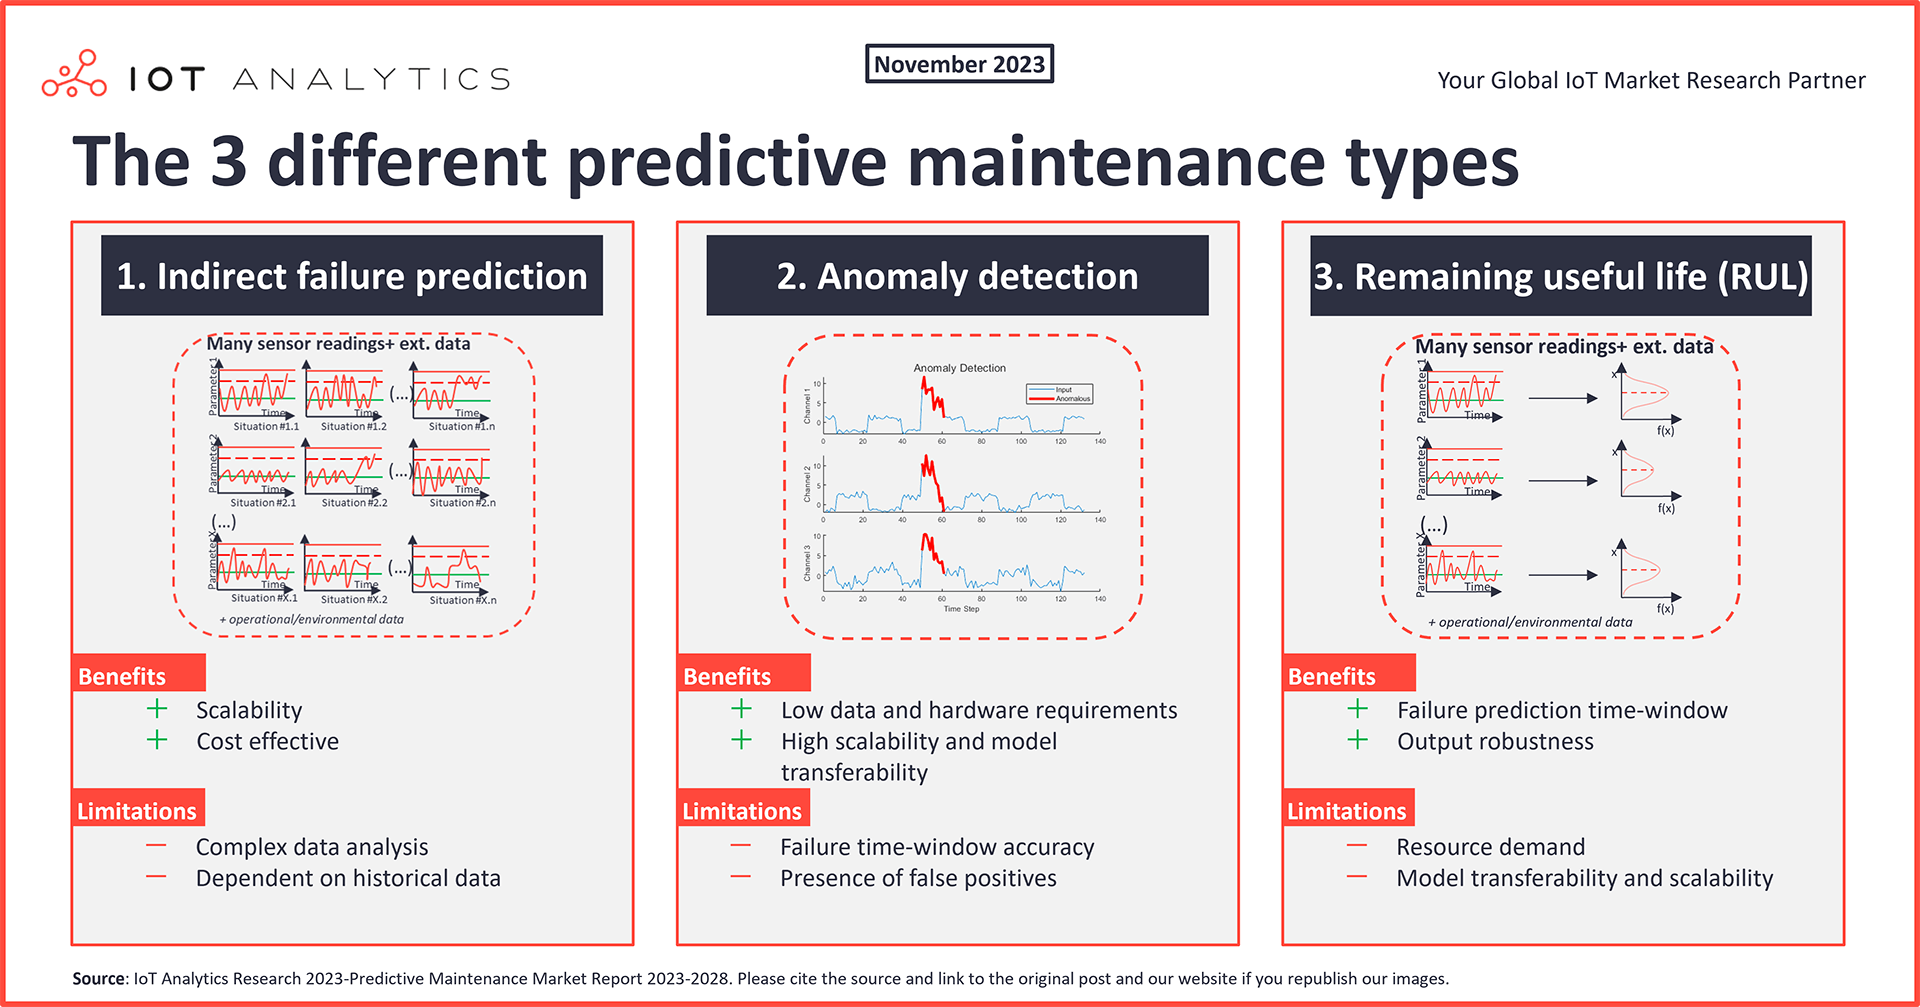 The 3 different predictive maintenance types